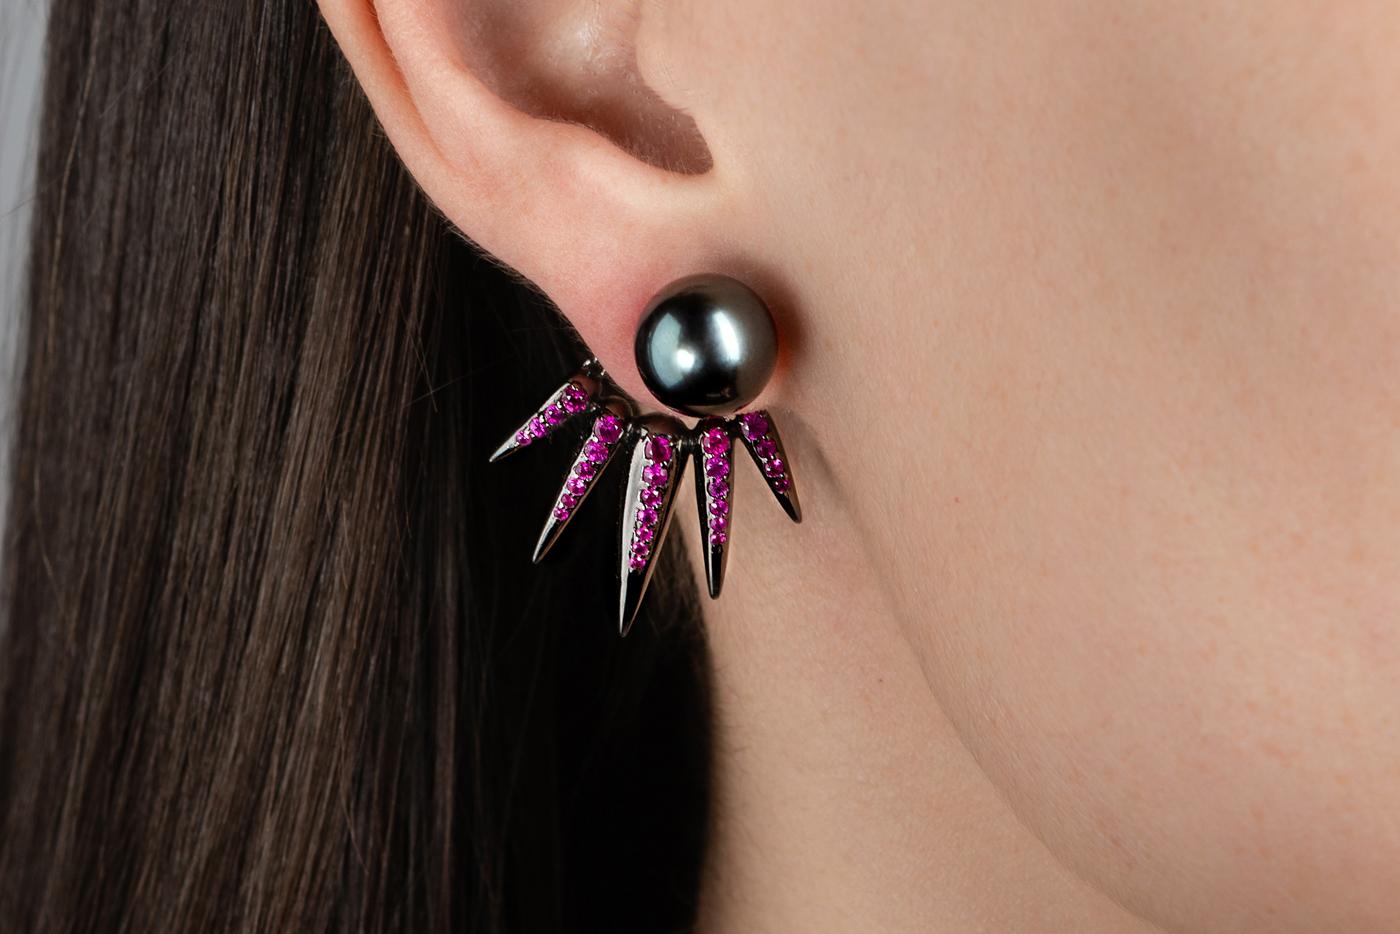 These Exquisite Jacket Earrings designed by Nikos Koulis and his characteristic Spectrum collection feature 1,25 carats of rubies, black pearl & black rhodium. Can be worn as a set or with several combinations composing a fascinating pair of